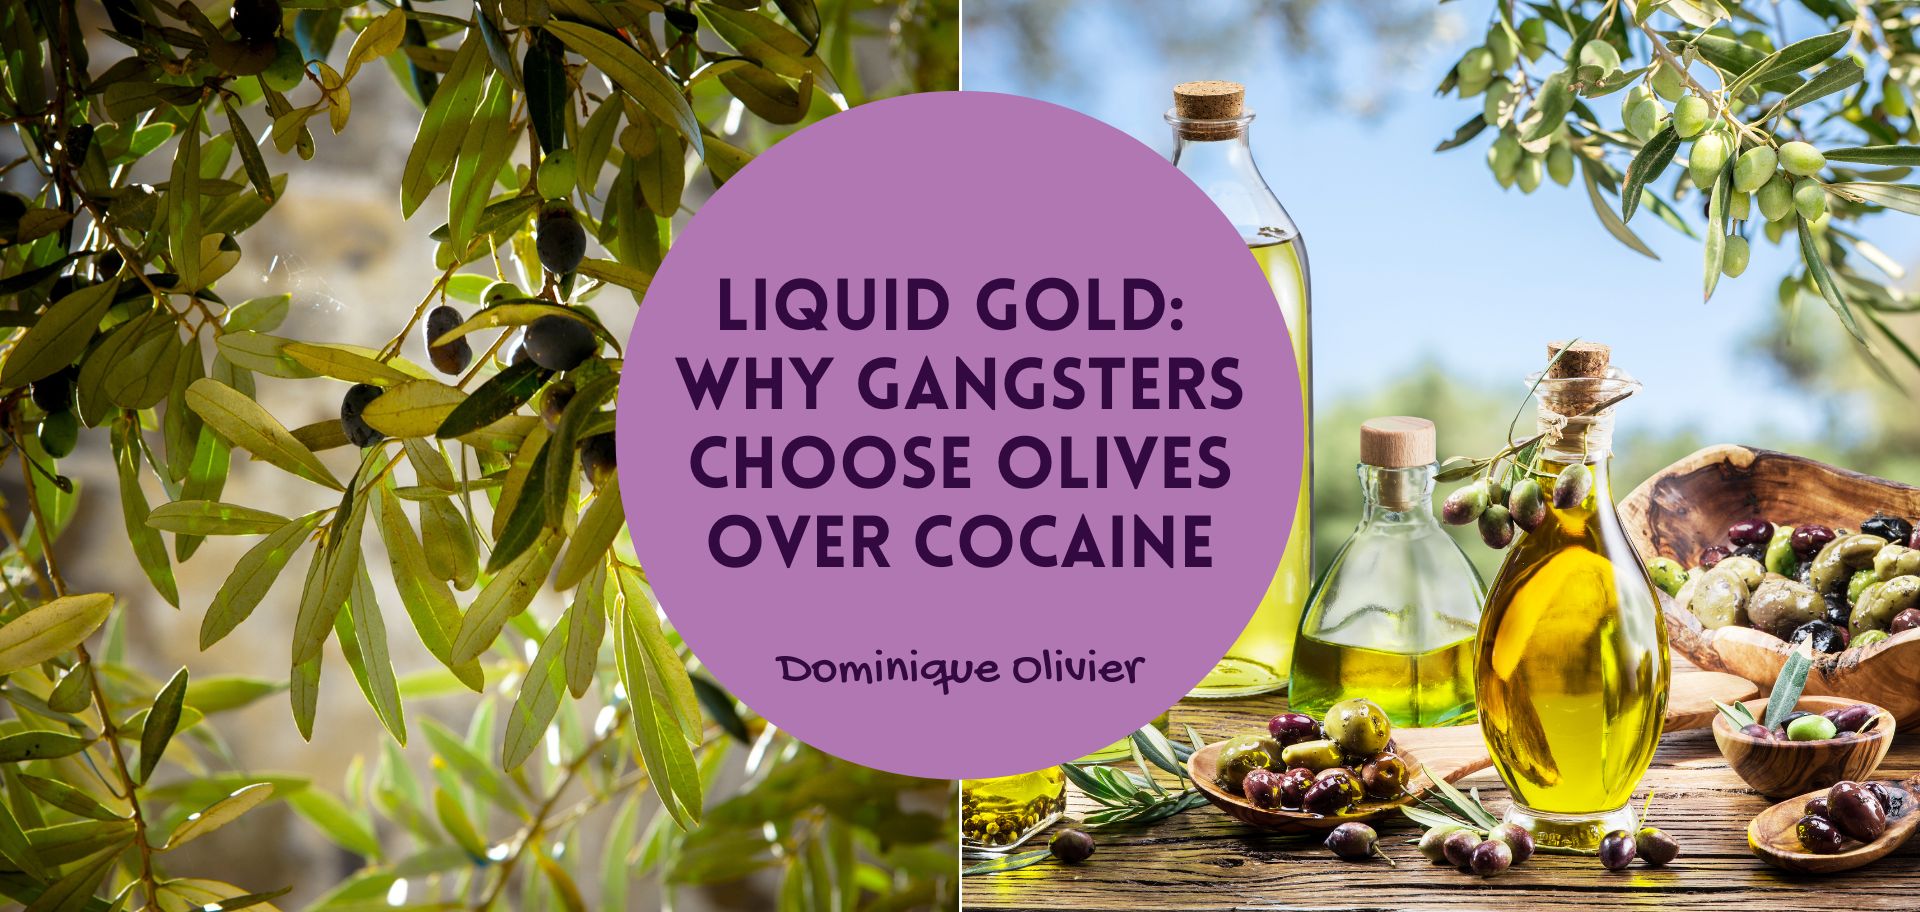 Liquid gold: why gangsters choose olives over cocaine